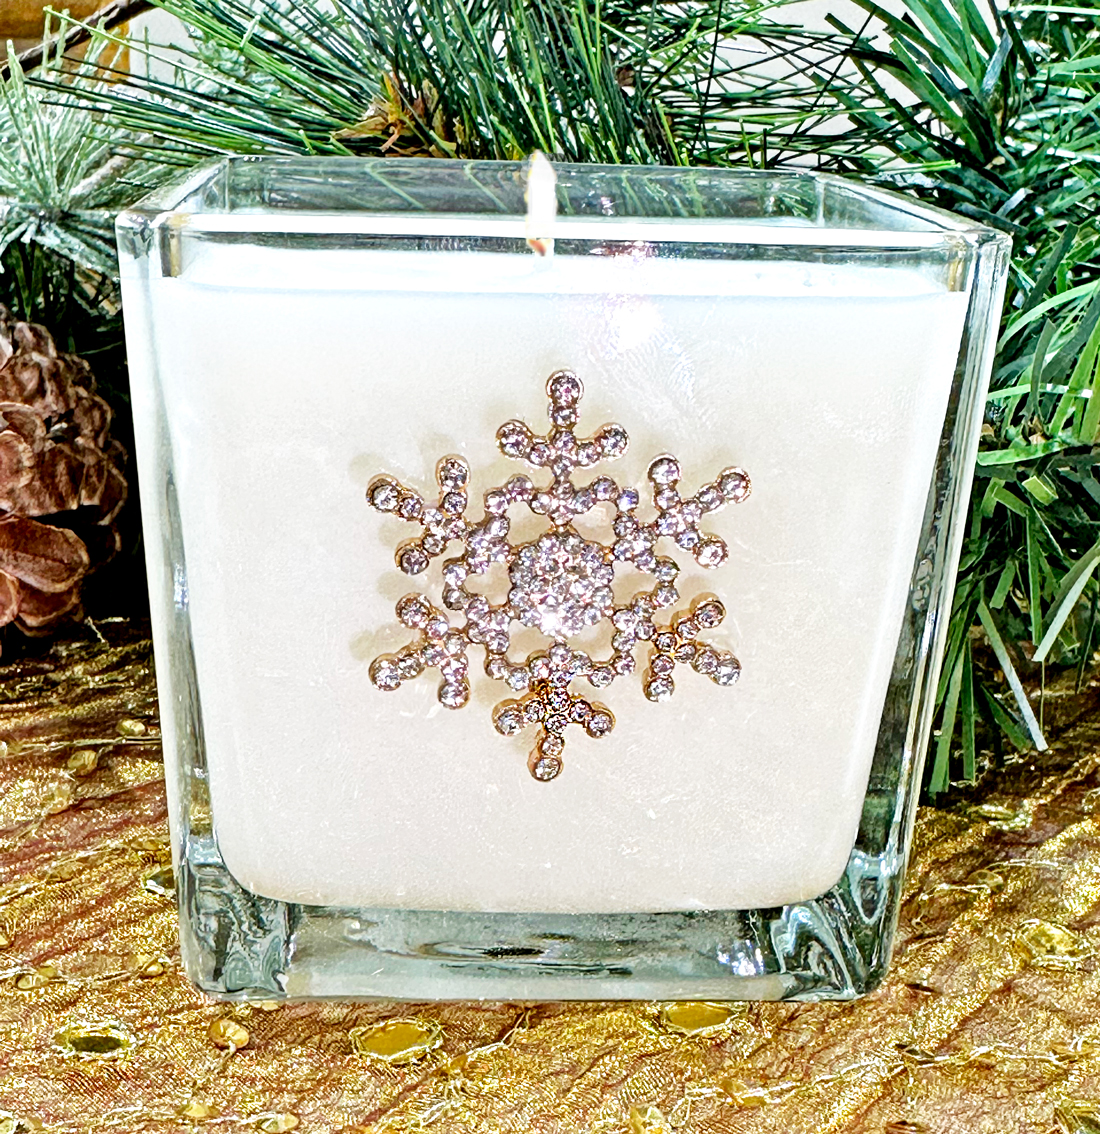 "SNOWFLAKE" JEWELED CANDLE - HOLLY BERRY